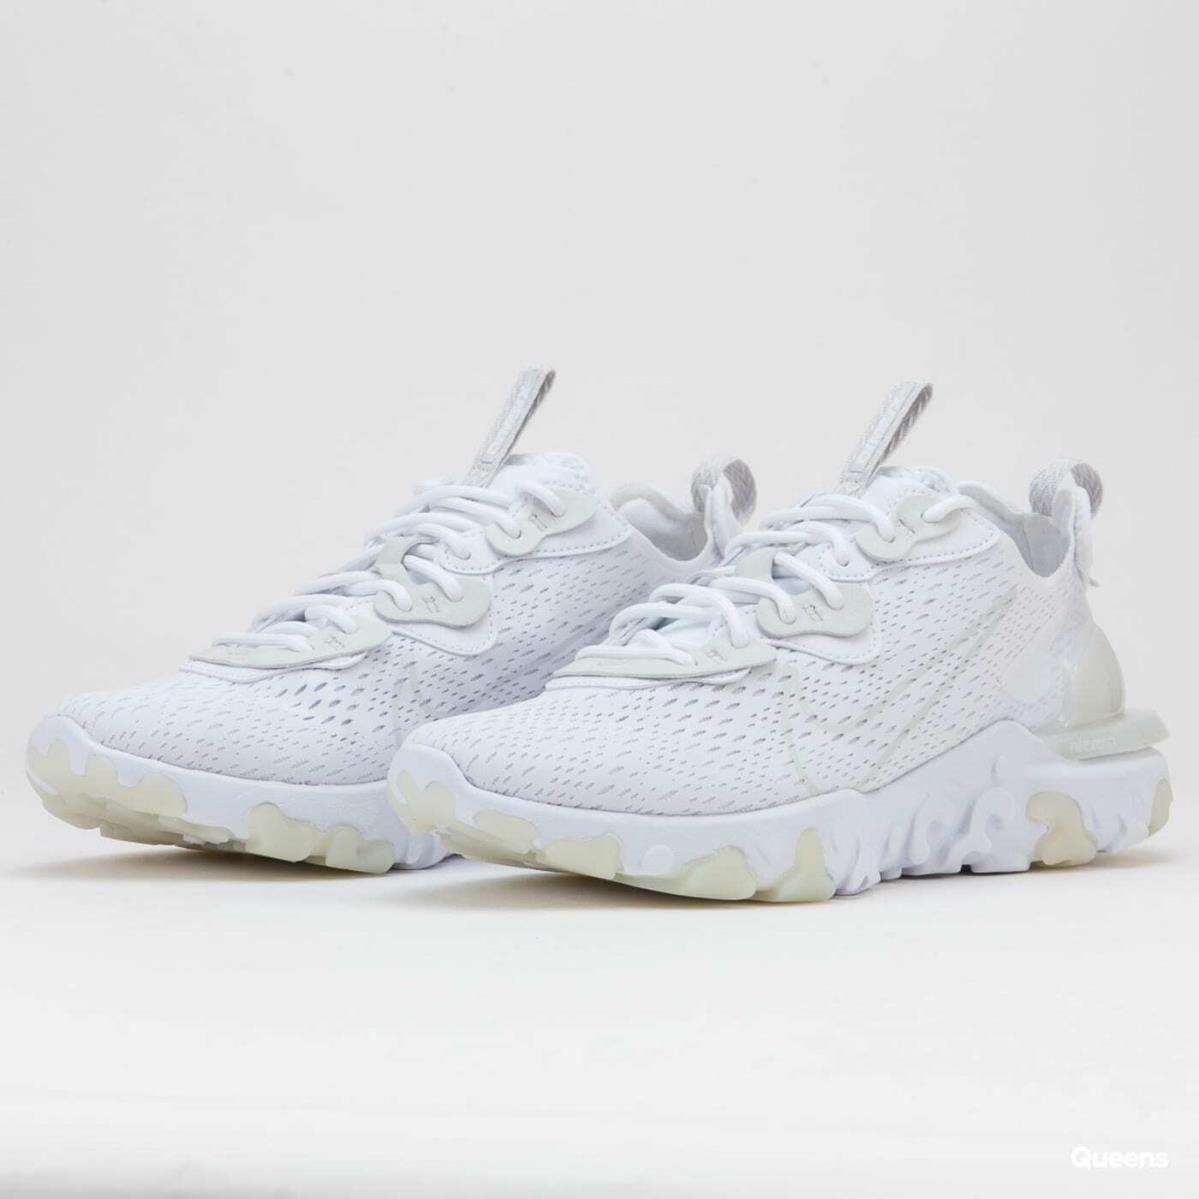 Nike React Vision Men`s Shoes Assorted Sizes CD4373 101 - White